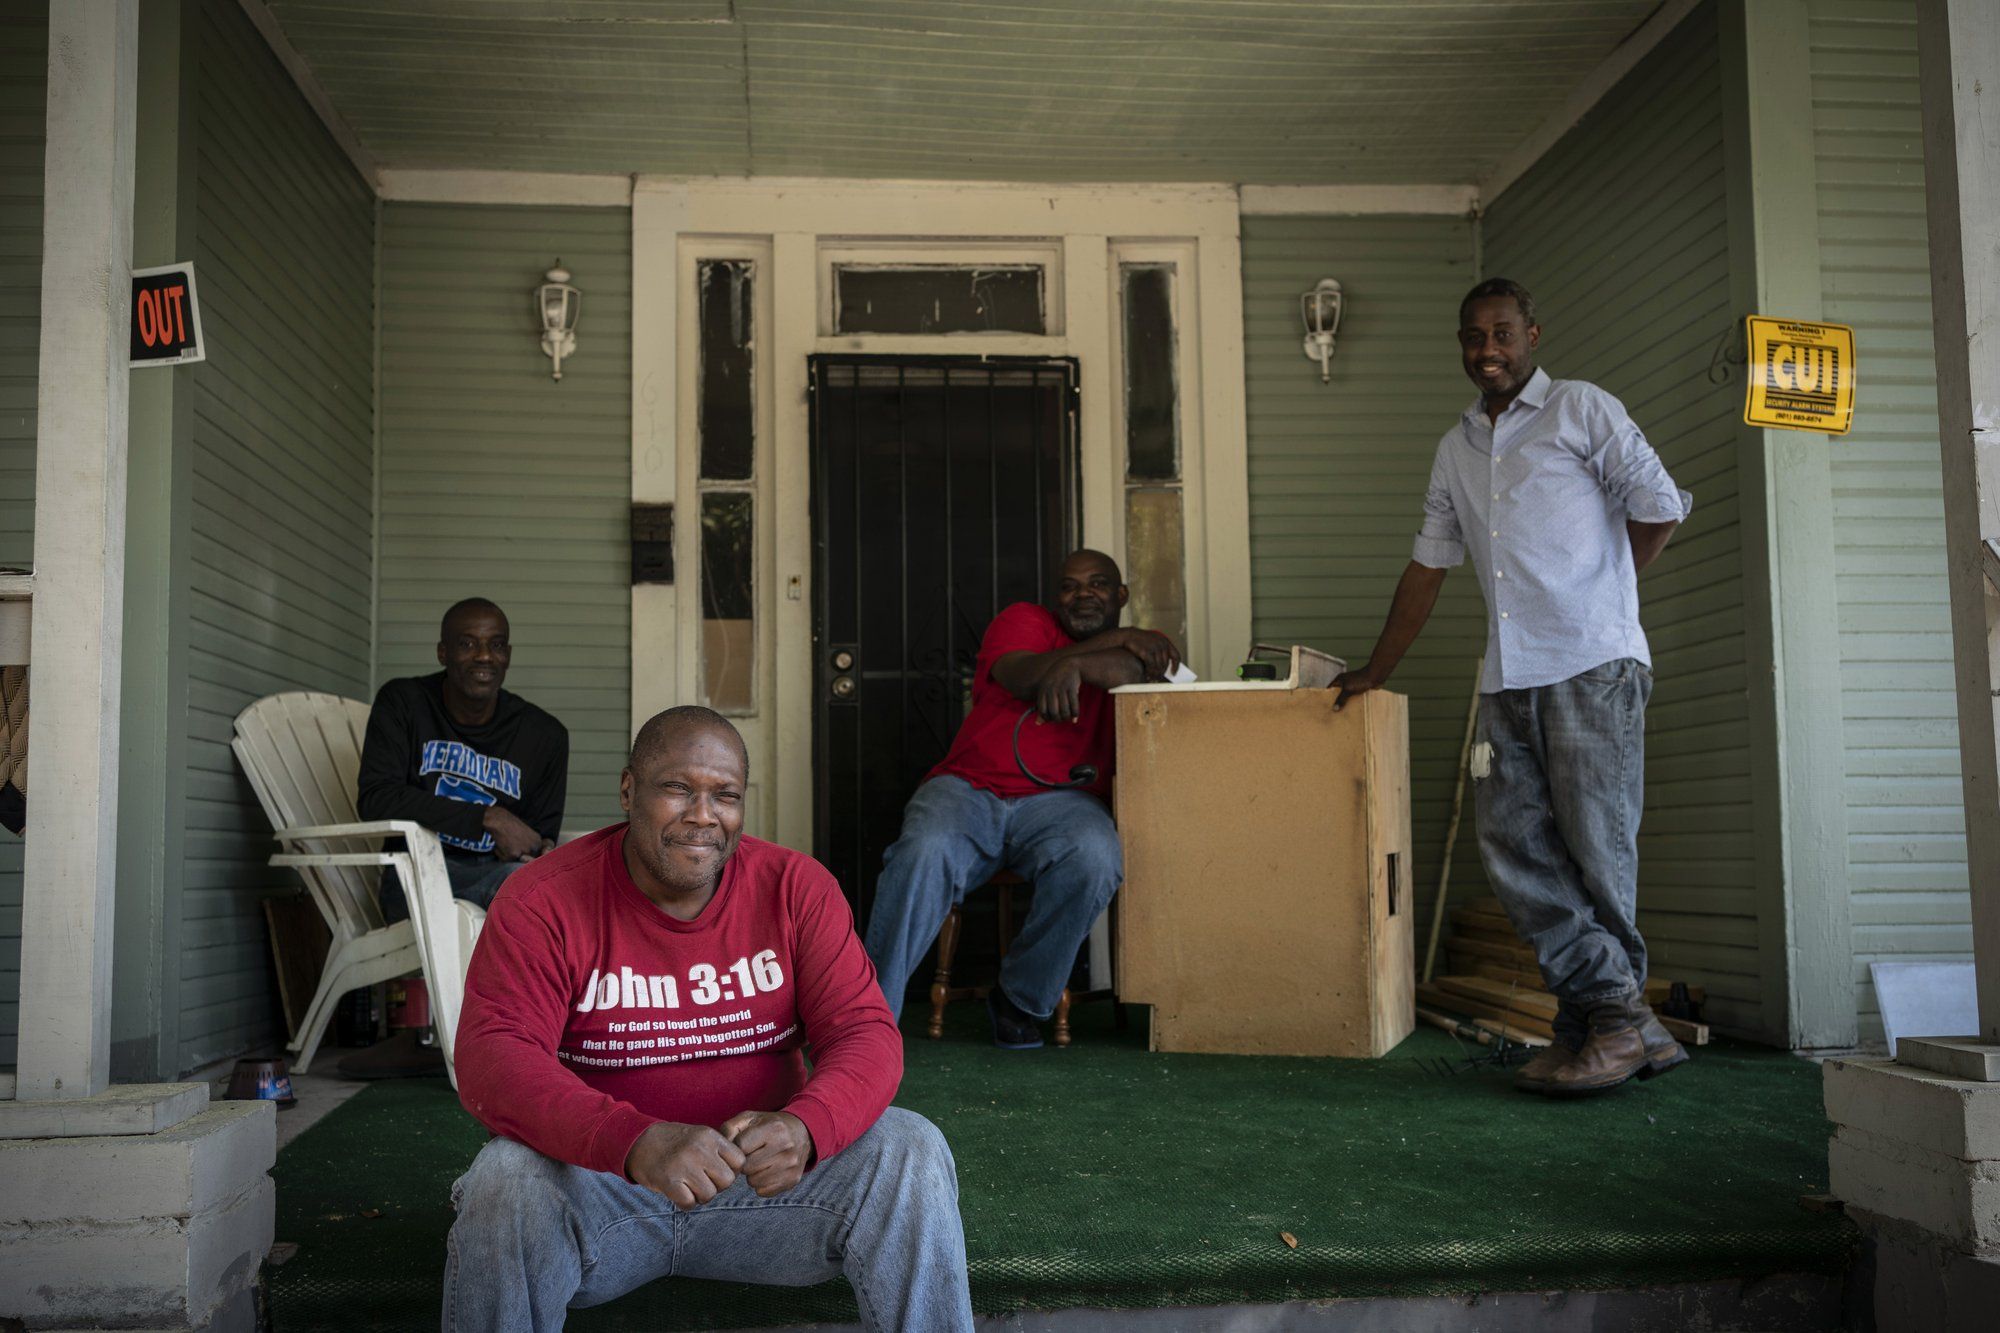 Pictured from left to right, Gregory Blanchard, 53, Clyde Lewis, 59, Tommy McCoy, 48, and Anthony Boggan, 49, pose for a group portrait on McCoy's front porch, in Meridian, Miss. Image by Wong Maye-E / The Associated Press. United States, 2020.